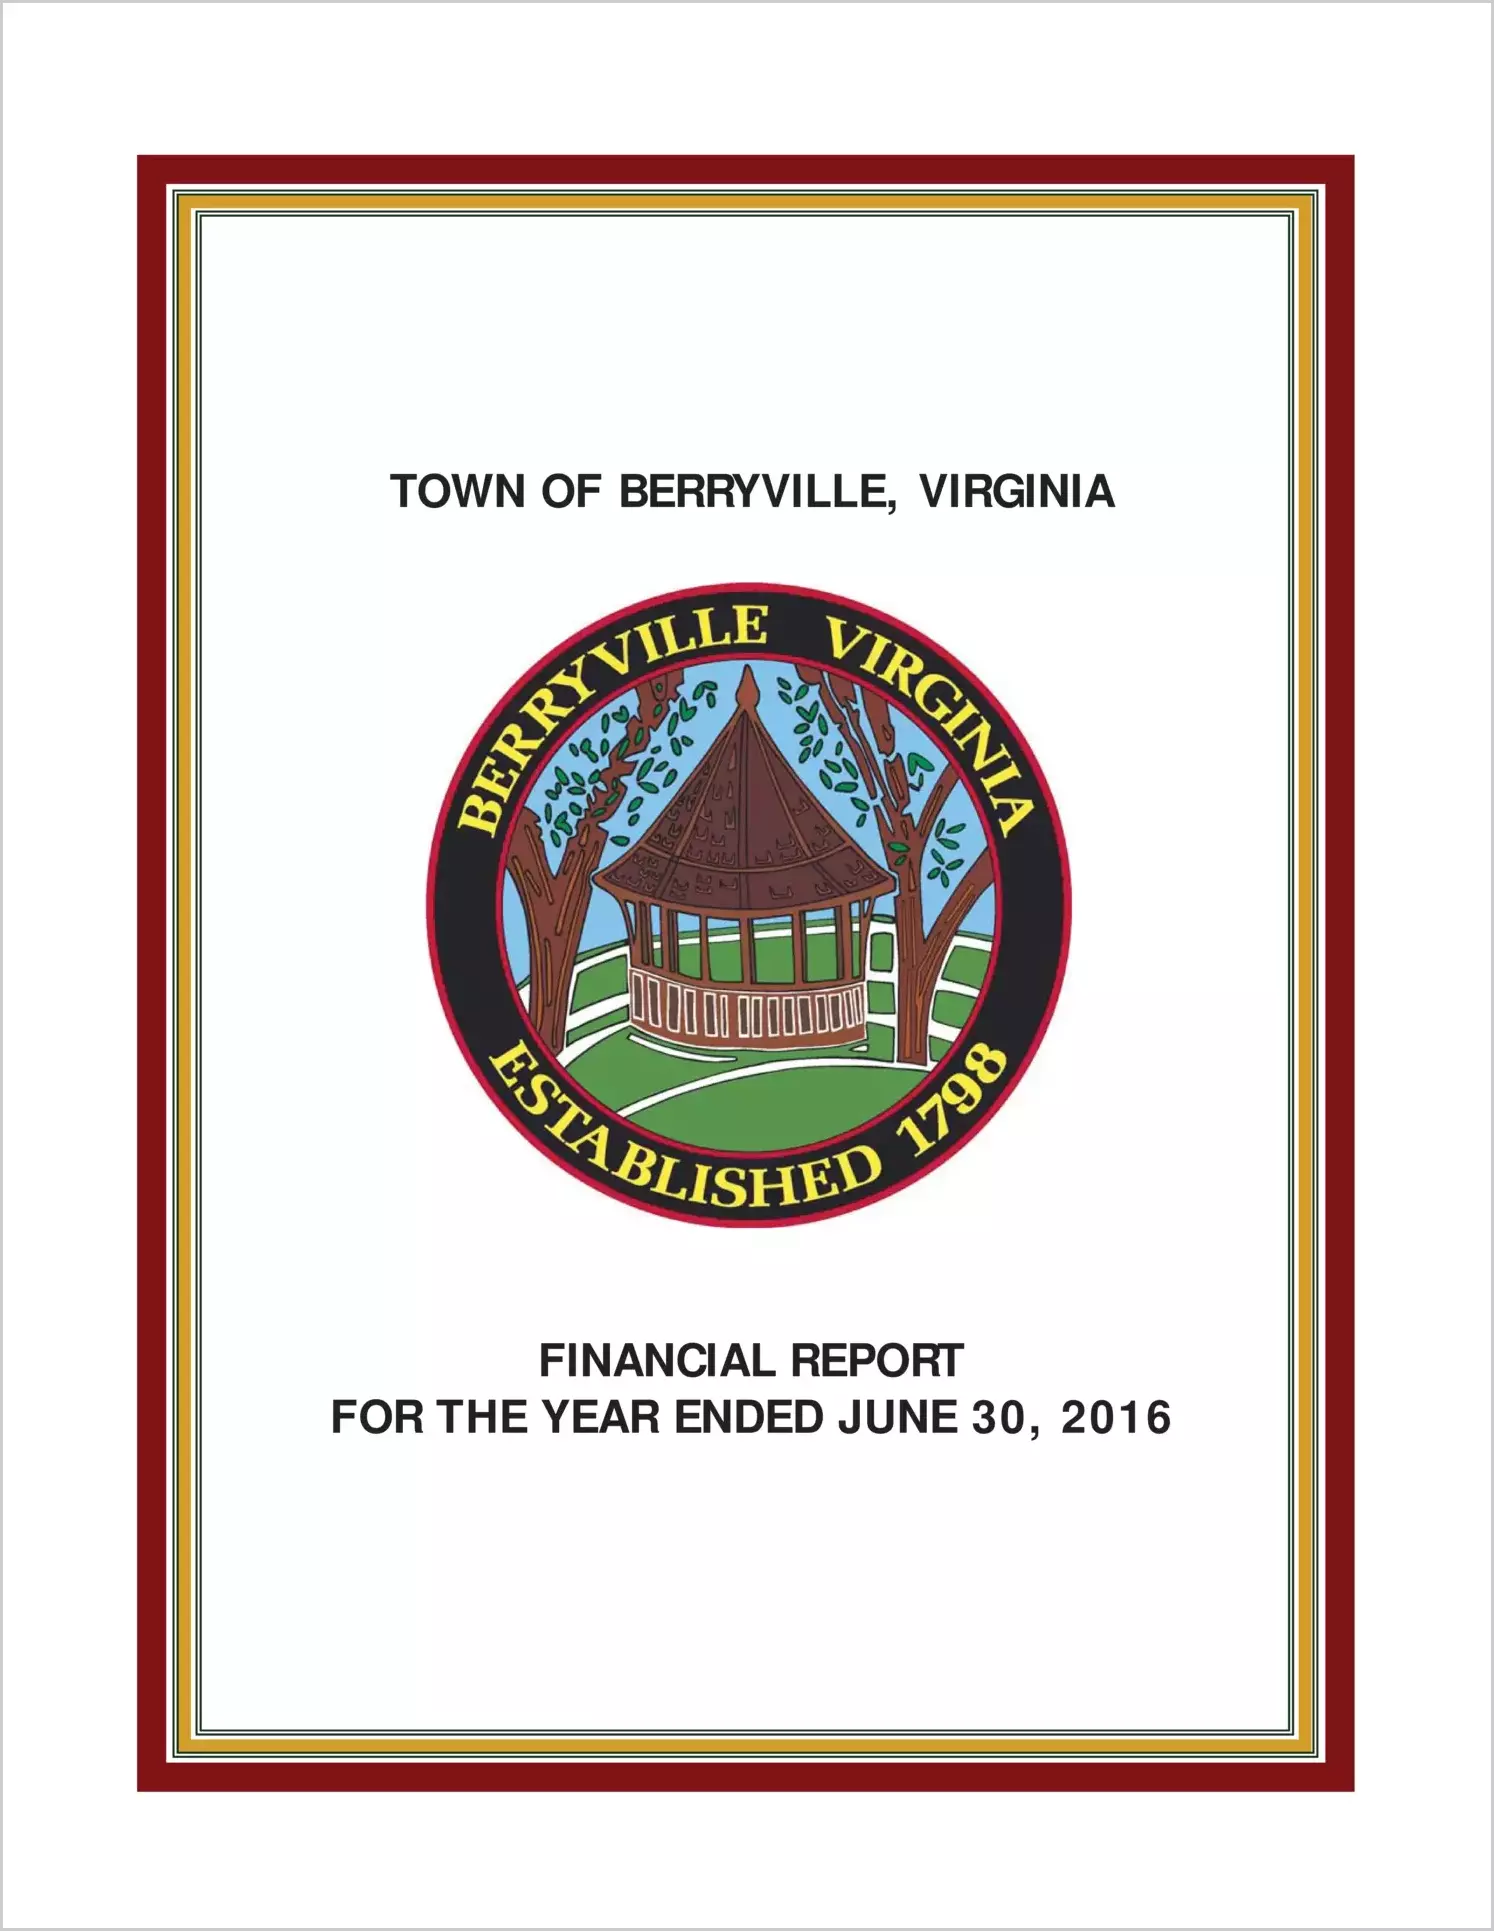 2016 Annual Financial Report for Town of Berryville